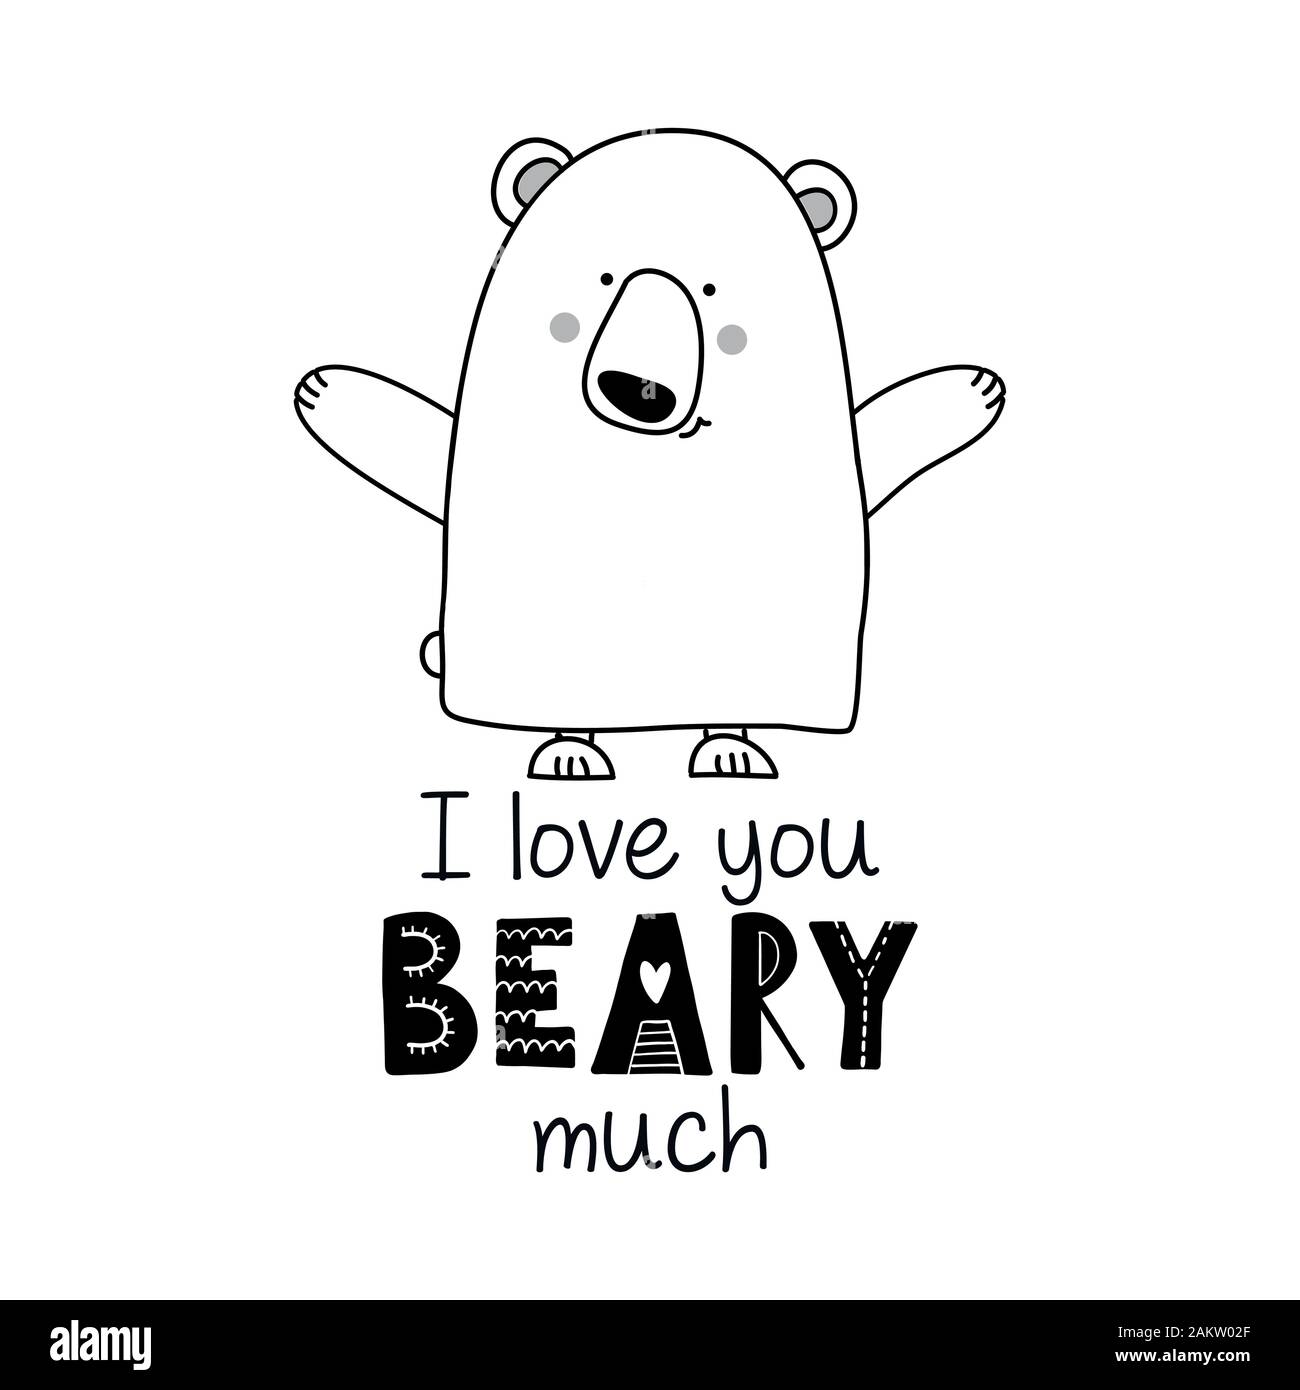 I love you Beary (very) much - Typography poster with romantic ...